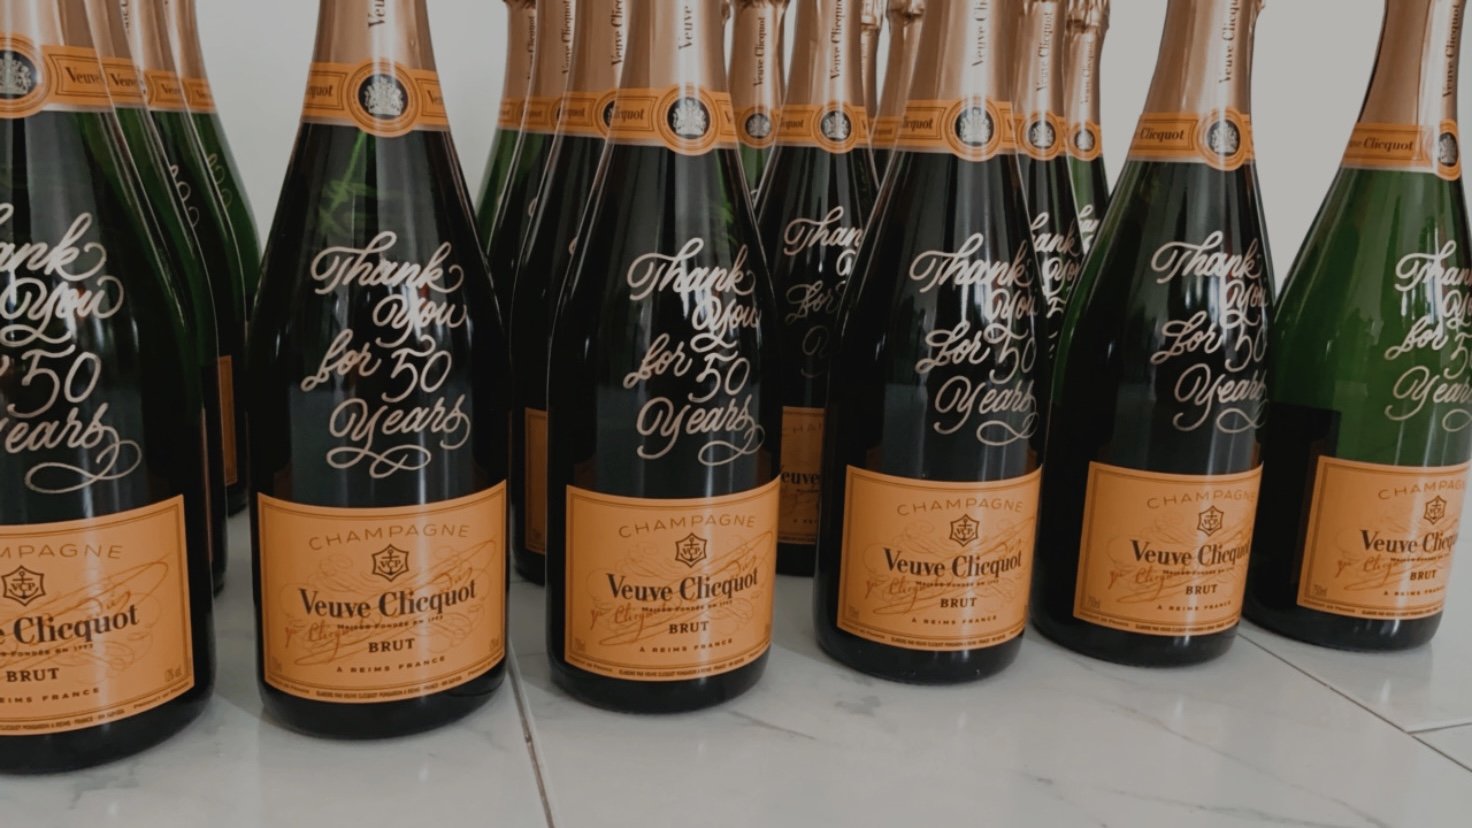 Western Asset Management Company | Customised Champagne in celebration of company’s 50th Year Anniversary